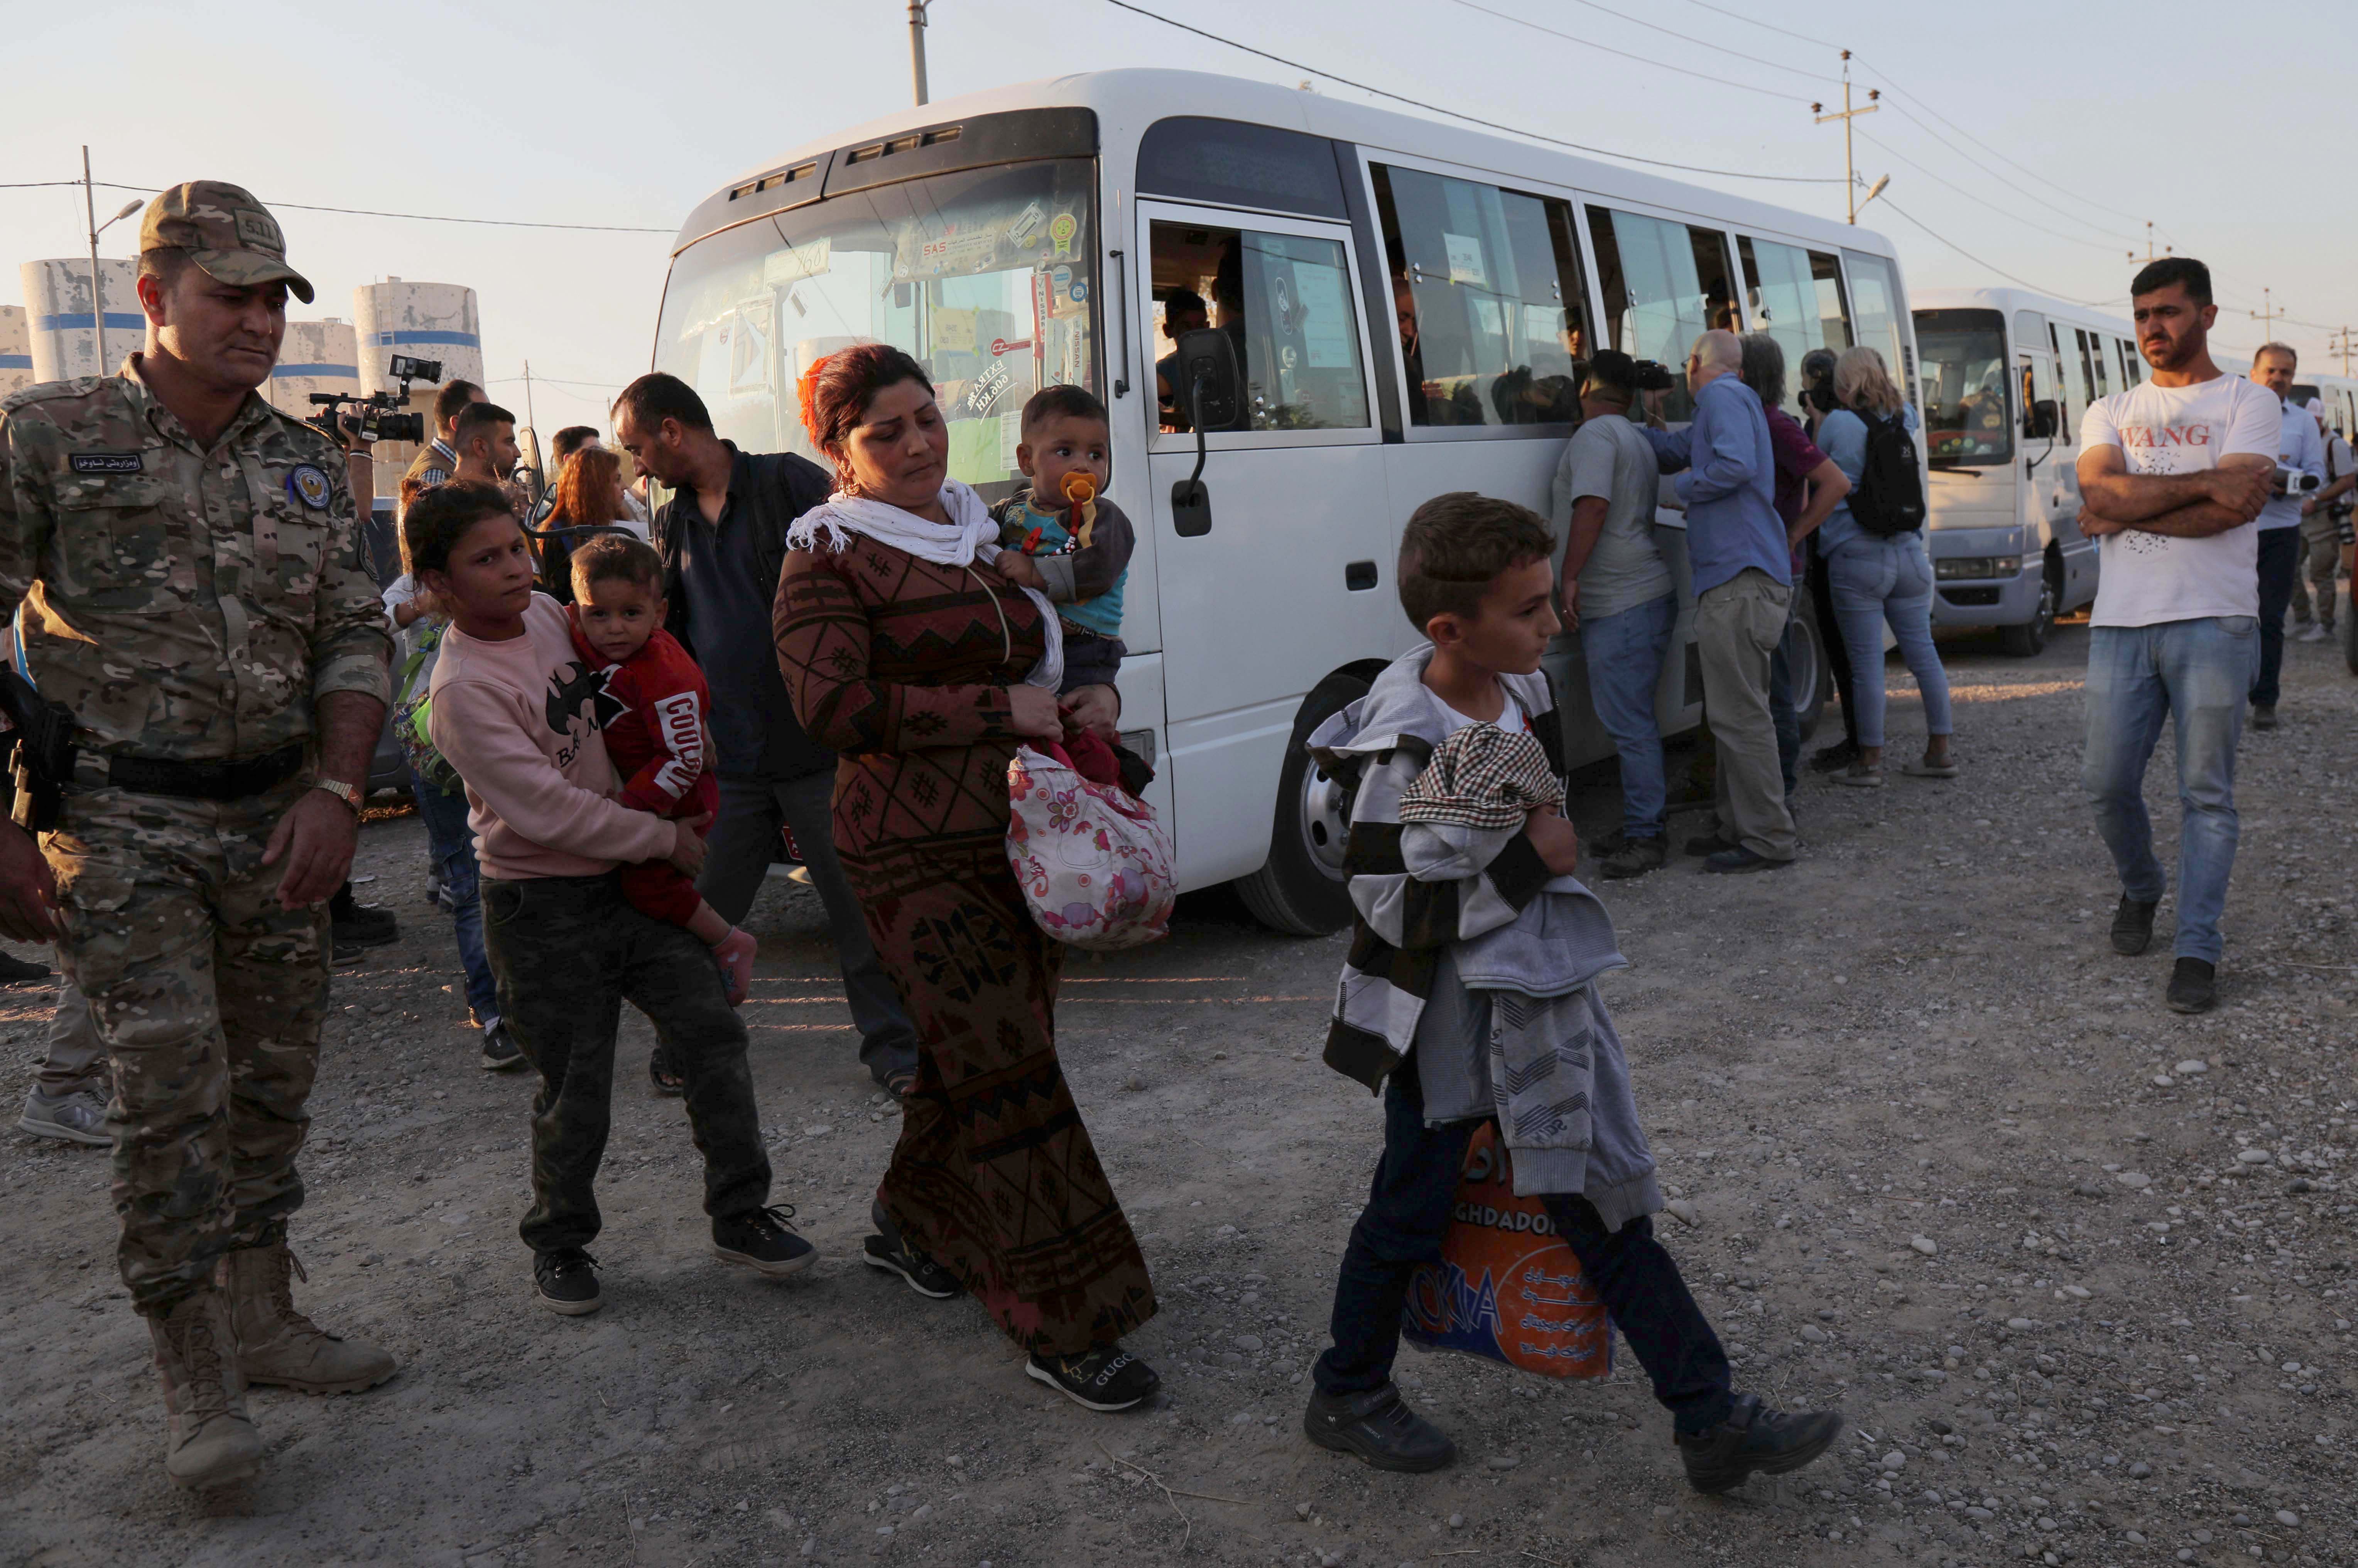 Syrians who have been recently-turned refugees by the Turkish military operation in northeastern Syria are pictured upon arriving at the Bardarash camp, near the Kurdish city of Dohuk, in Iraq's autonomous Kurdish region, on October 16, 2019. (SAFIN HAMED/AFP via Getty Images)